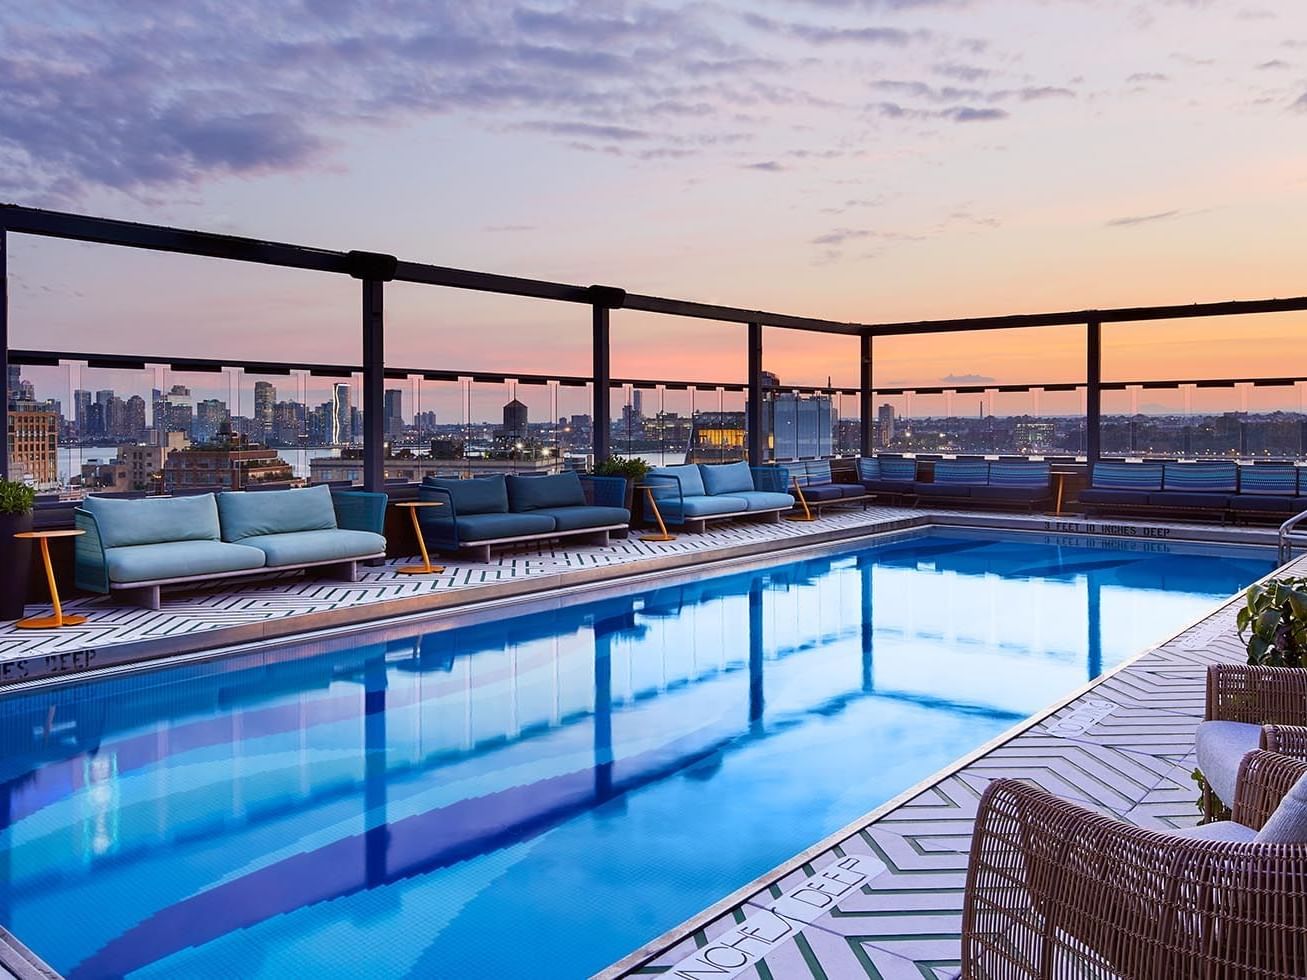 Lounge by the Rooftop pool at Gansevoort Meatpacking NYC